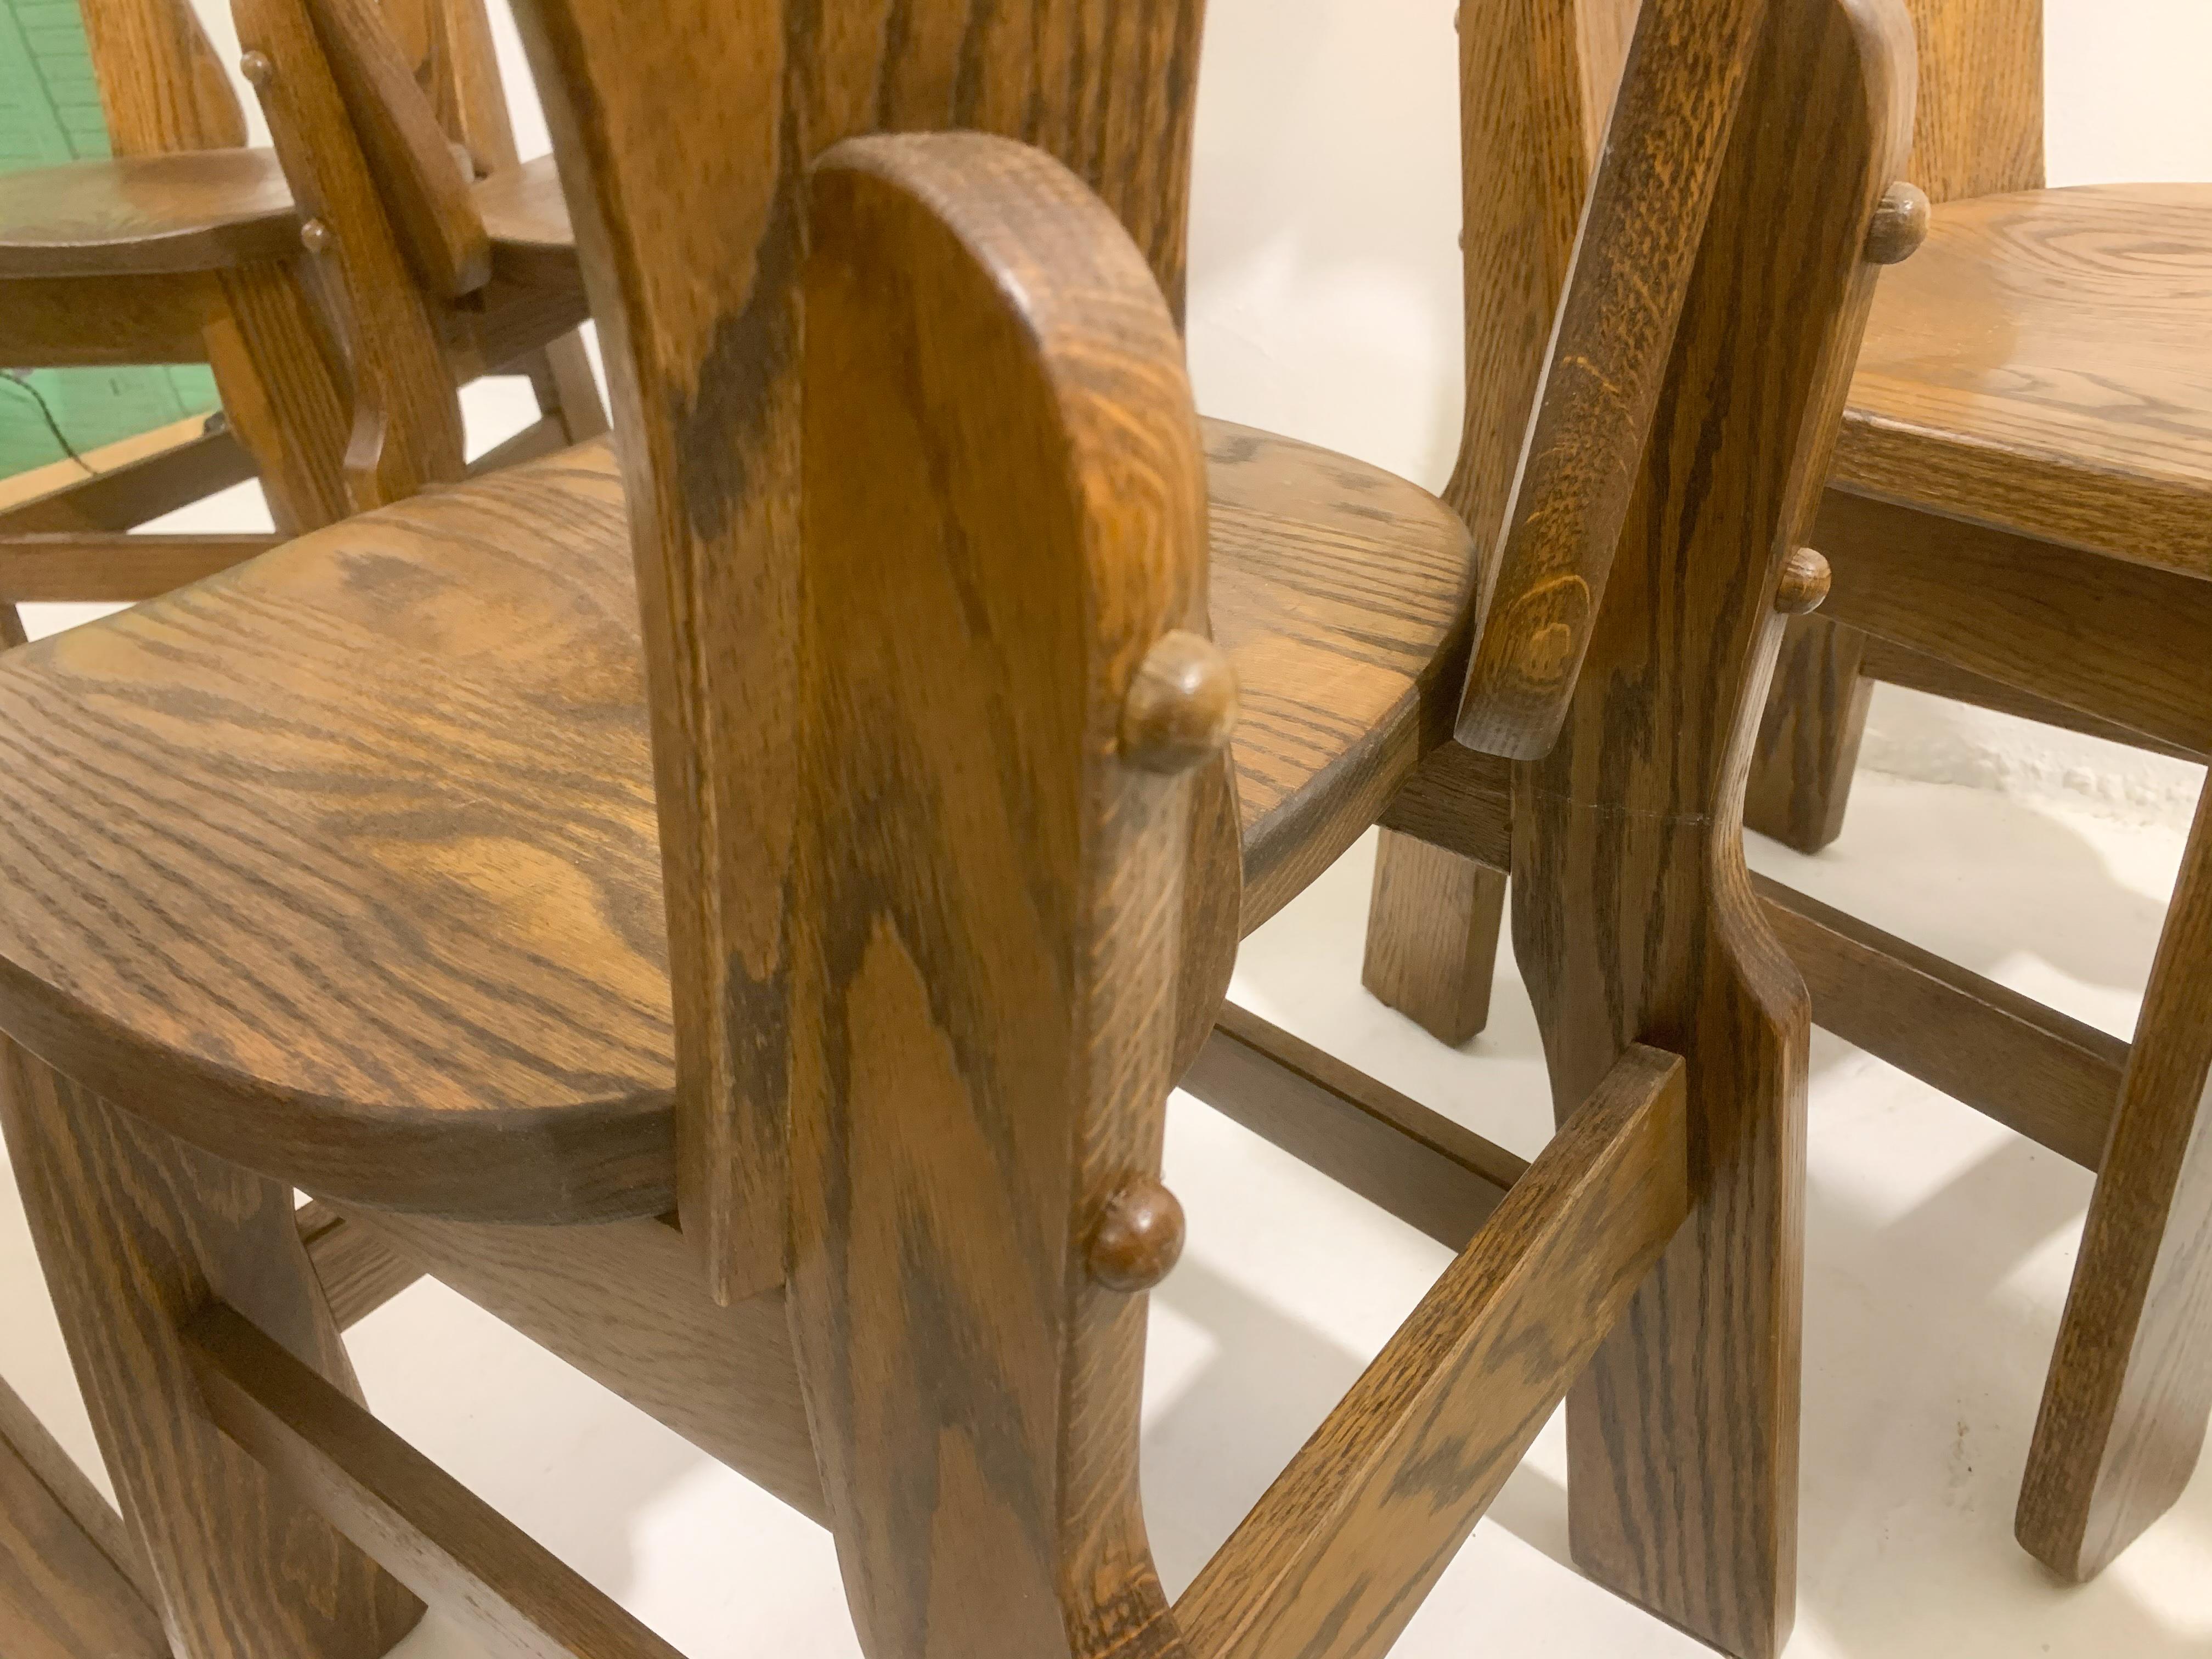 Late 20th Century Mid-Century Modern Set of 8 Brutalist Wooden Chairs, Belgium, 1970s For Sale